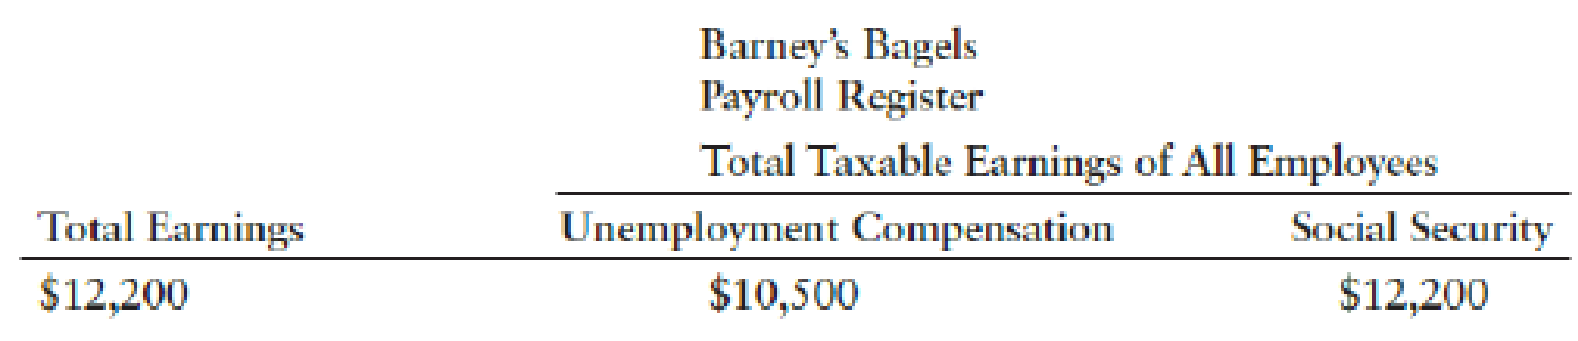 Chapter 9, Problem 1SEA, CALCULATION AND JOURNAL ENTRY FOR EMPLOYER PAYROLL TAXES Portions of the payroll register for 